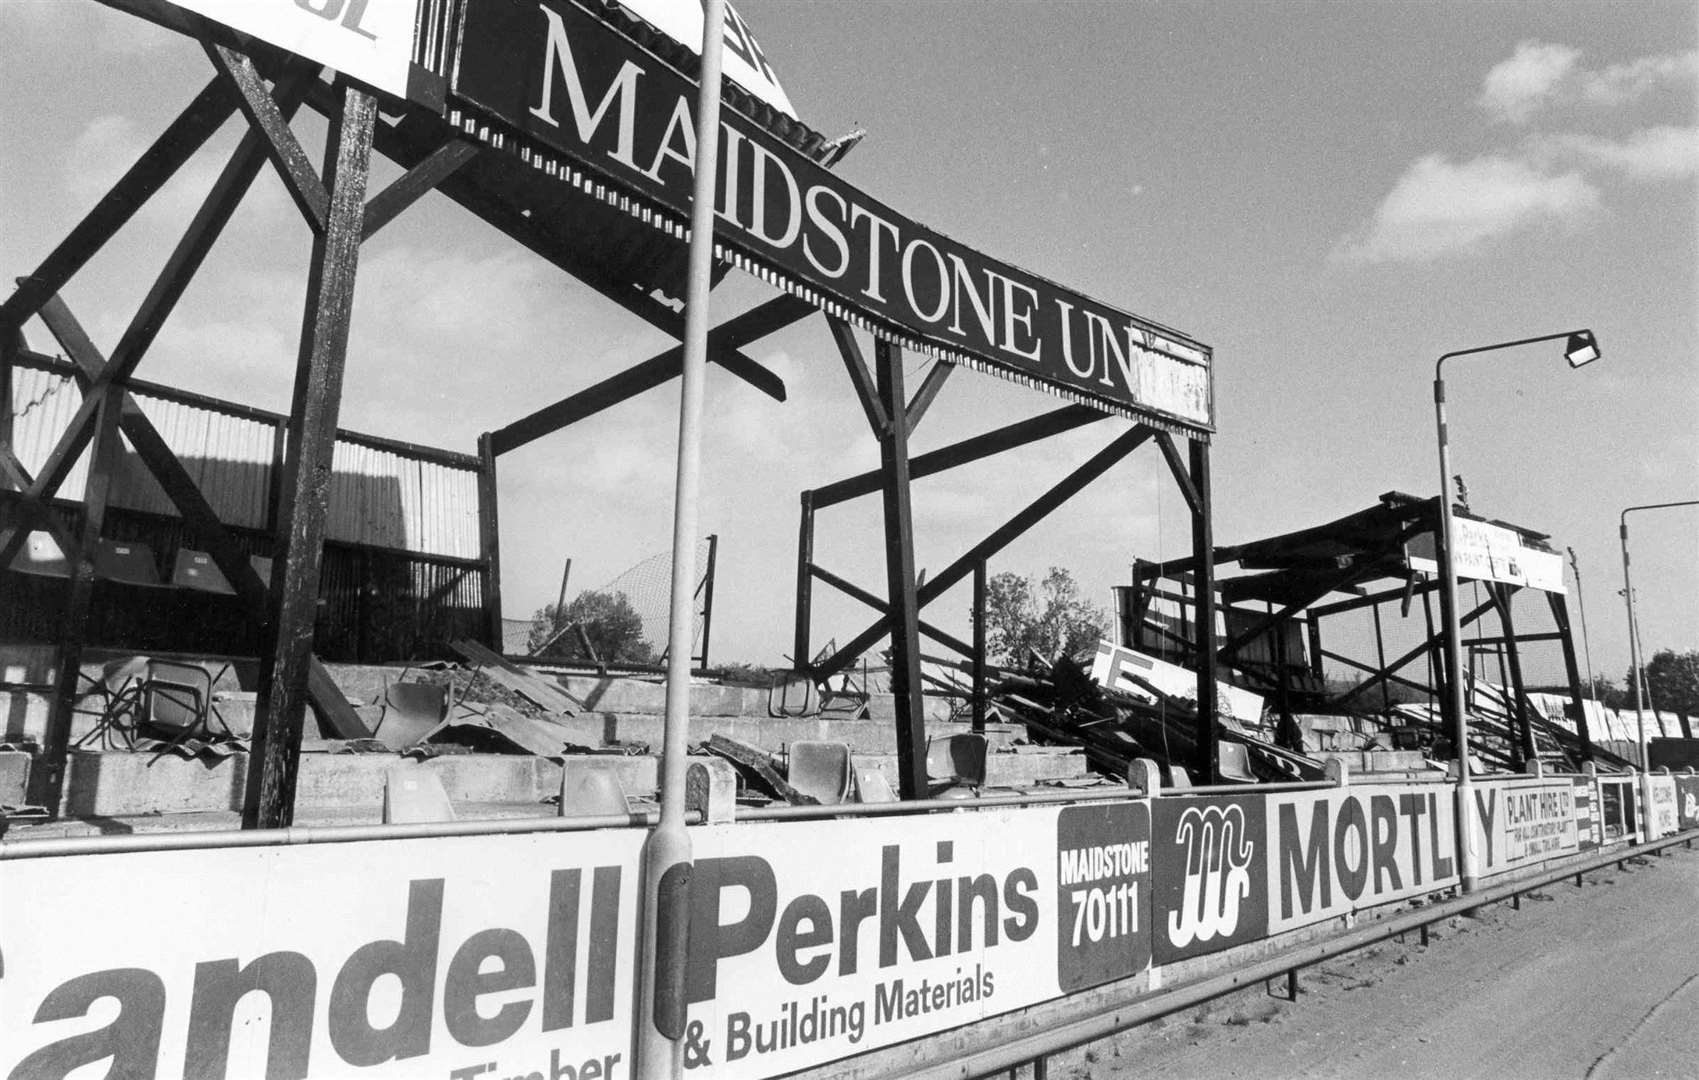 The great storm of 1987 caused £100,000 worth of damage to Maidstone United's Athletic Ground home in London Road. A year later, the club had sold the ground